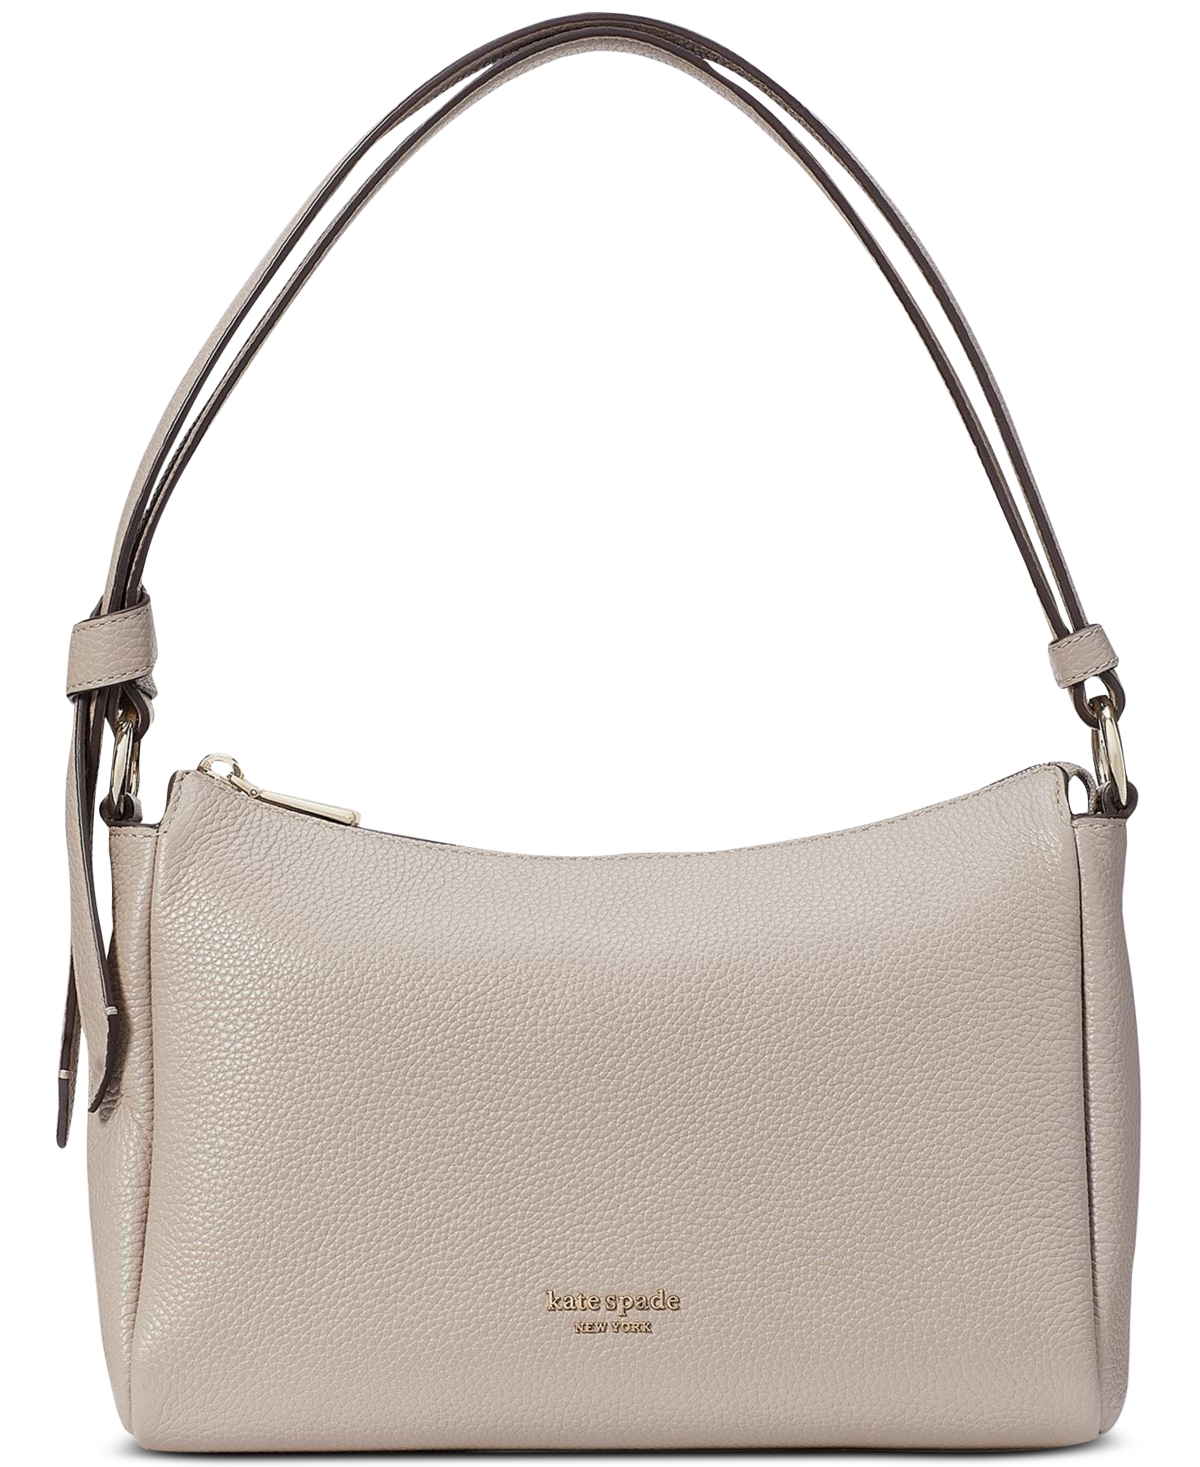 kate sapde new york Knott Small Pebbled Leather Shoulder Bag - Warm Taupe.